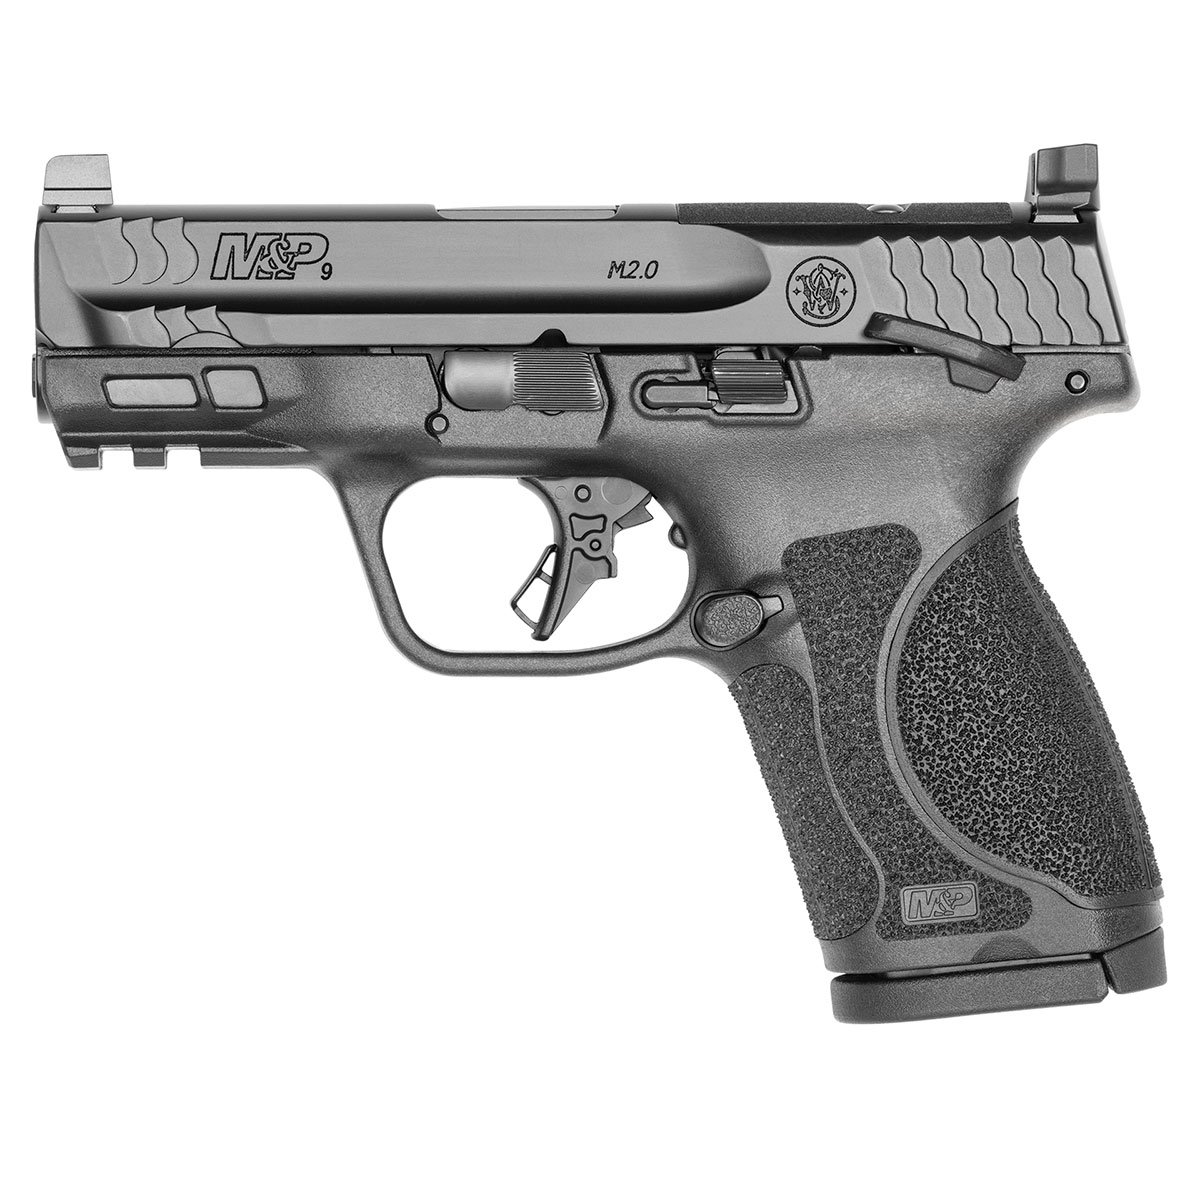 SMITH & WESSON - M&P 9 M2.0 COMPACT OPTIC READY 9MM LUGER HANDGUN